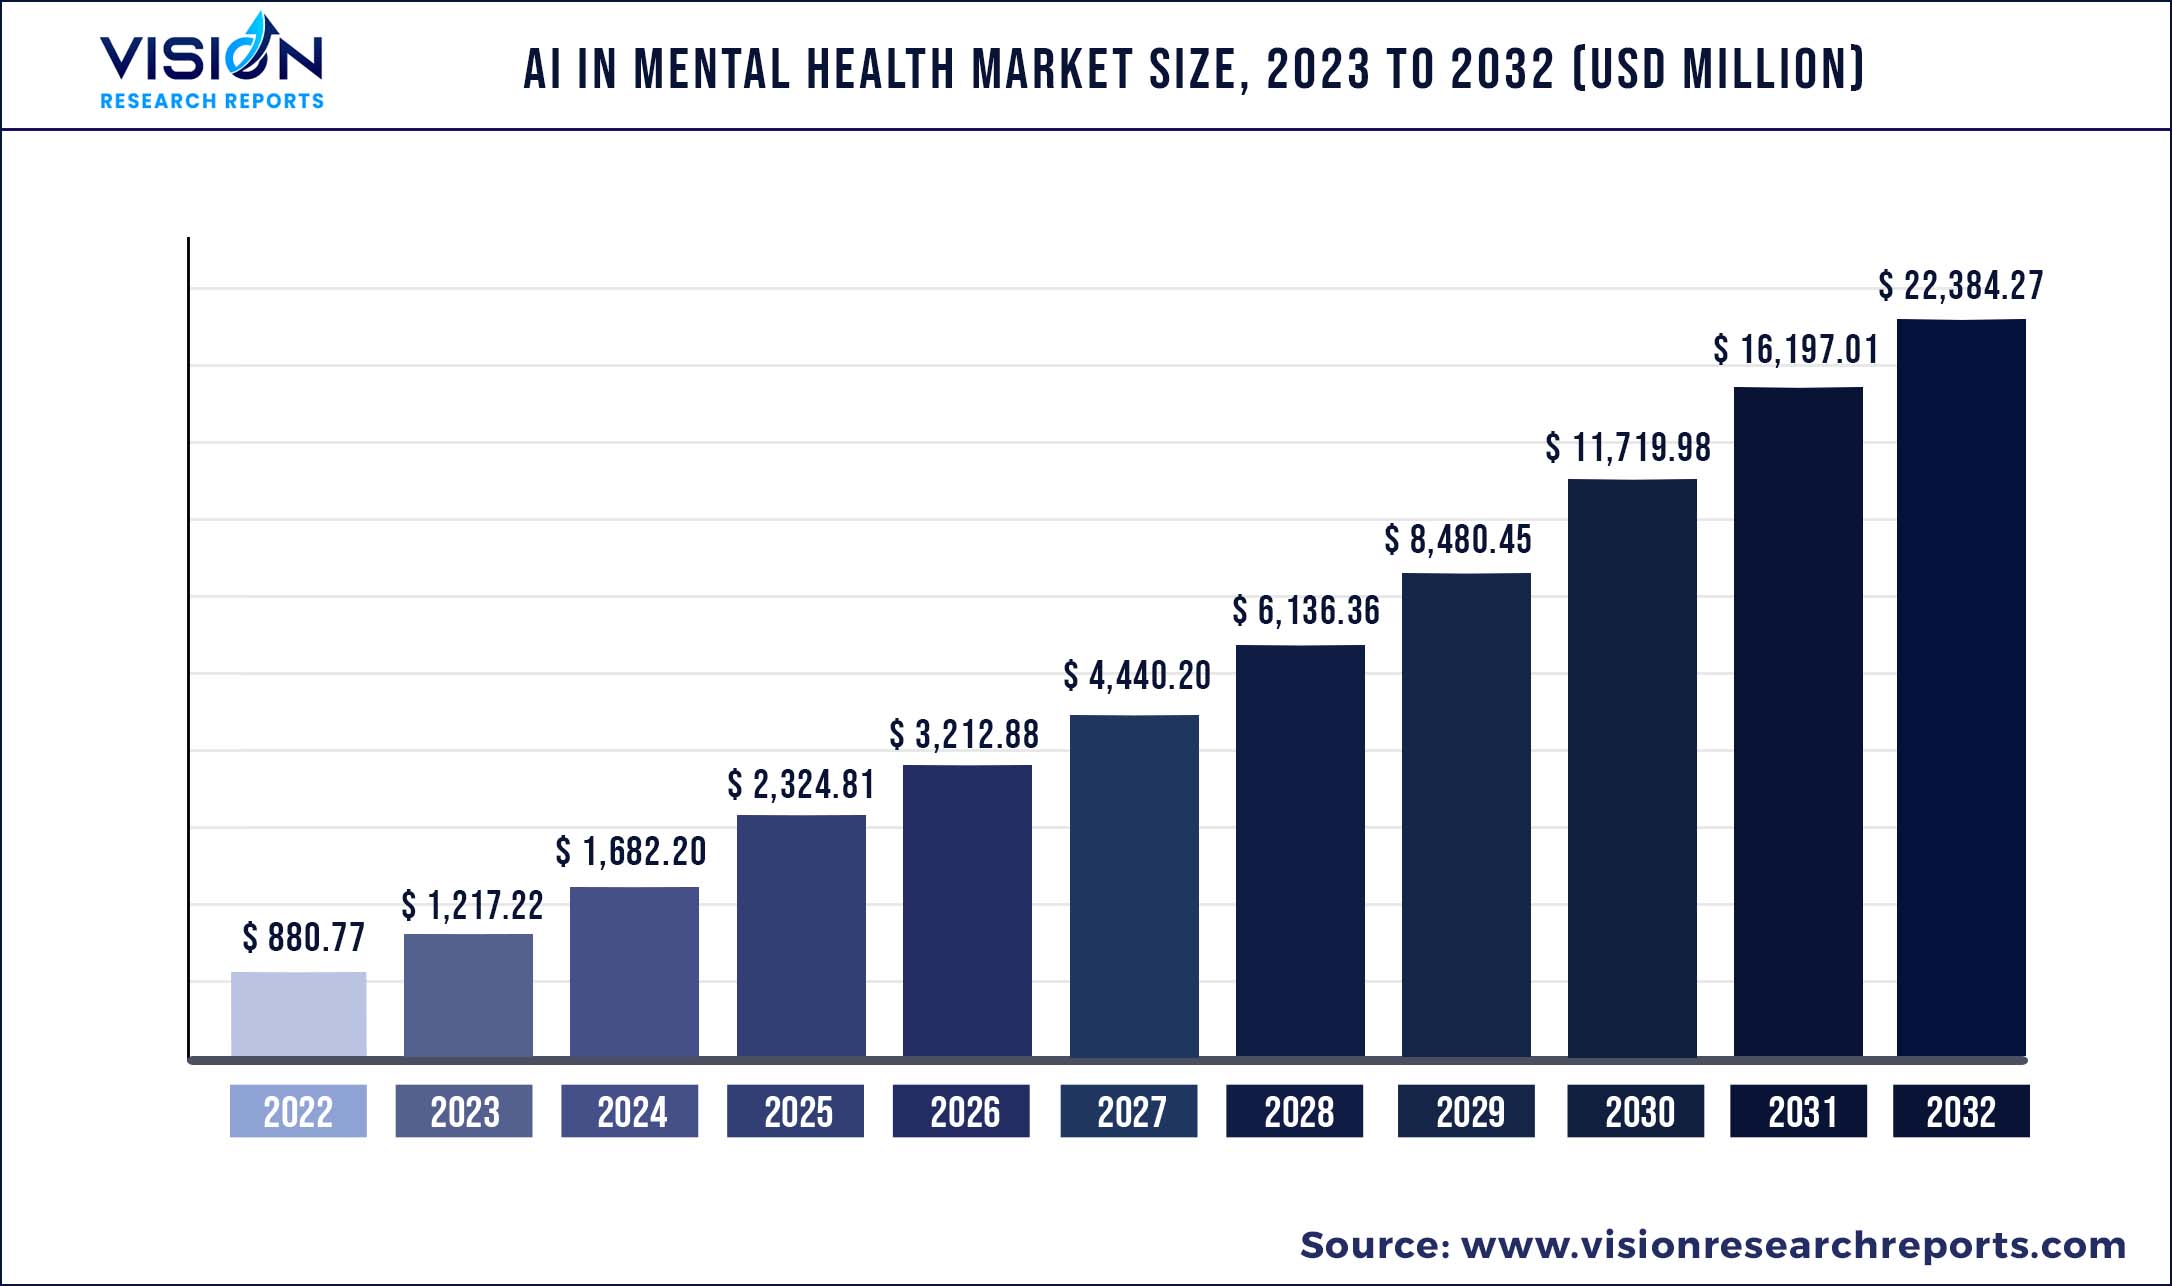 AI in Mental Health Market Size 2023 to 2032